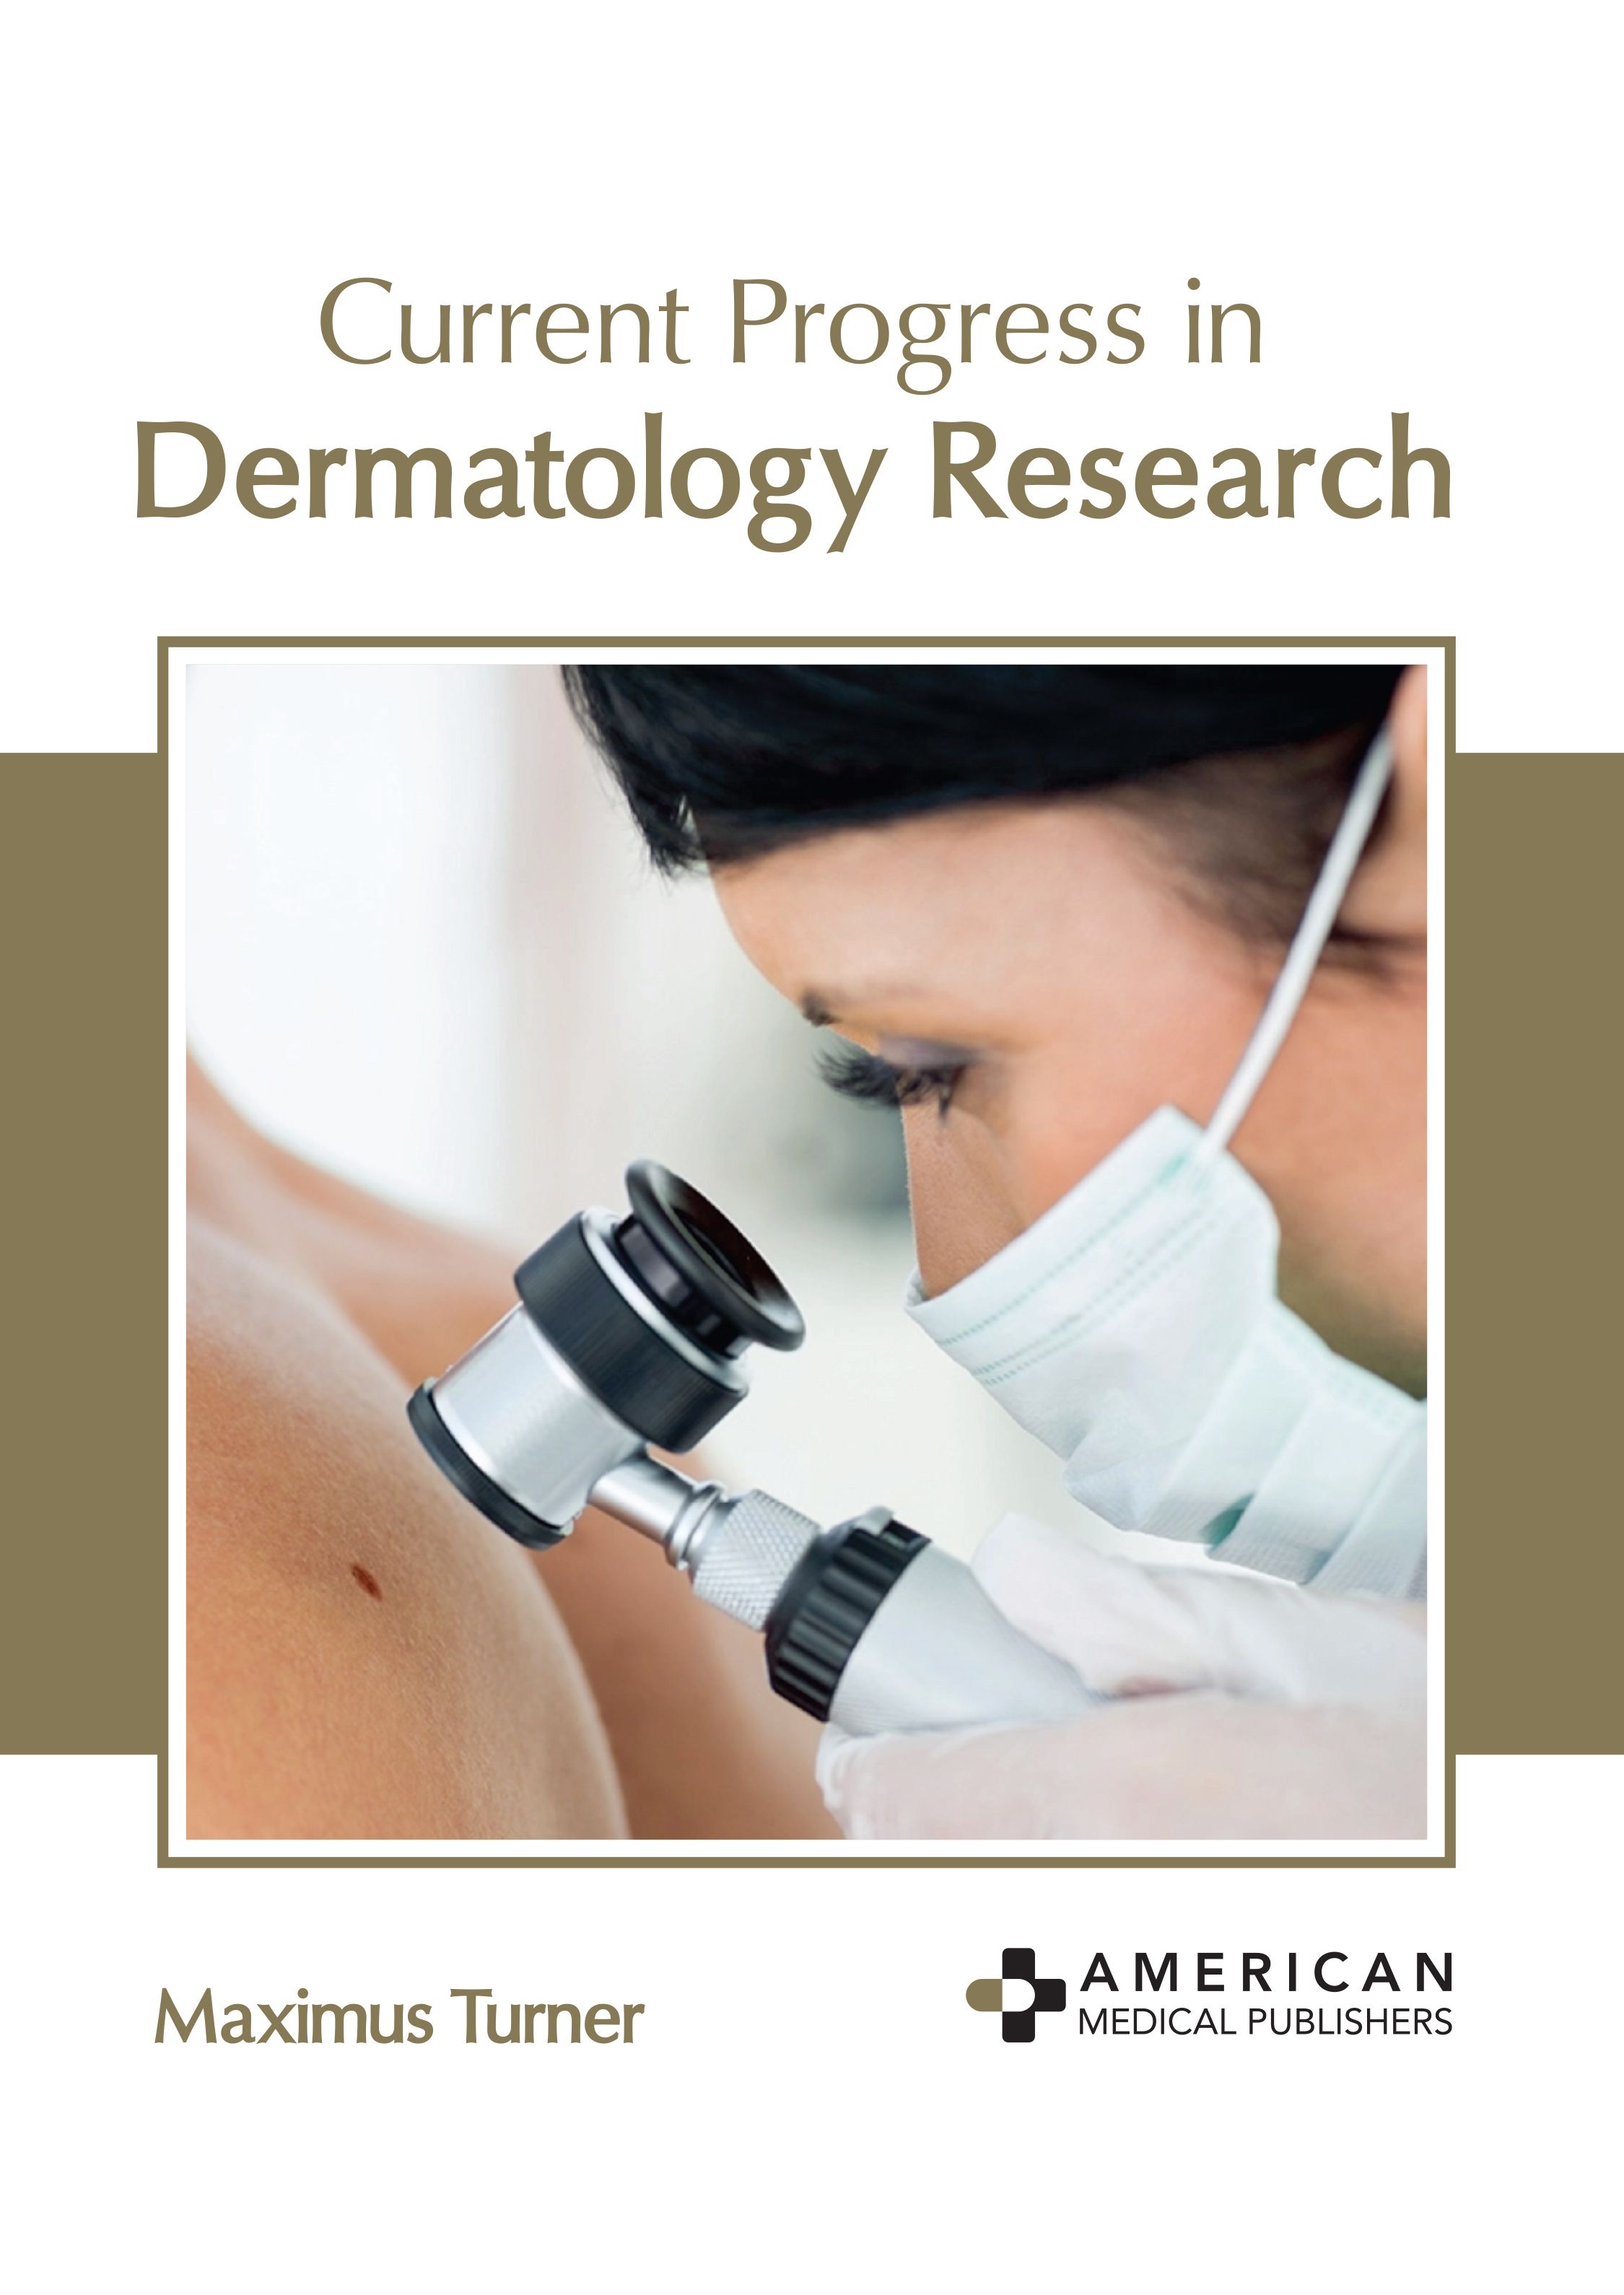 CURRENT PROGRESS IN DERMATOLOGY RESEARCH